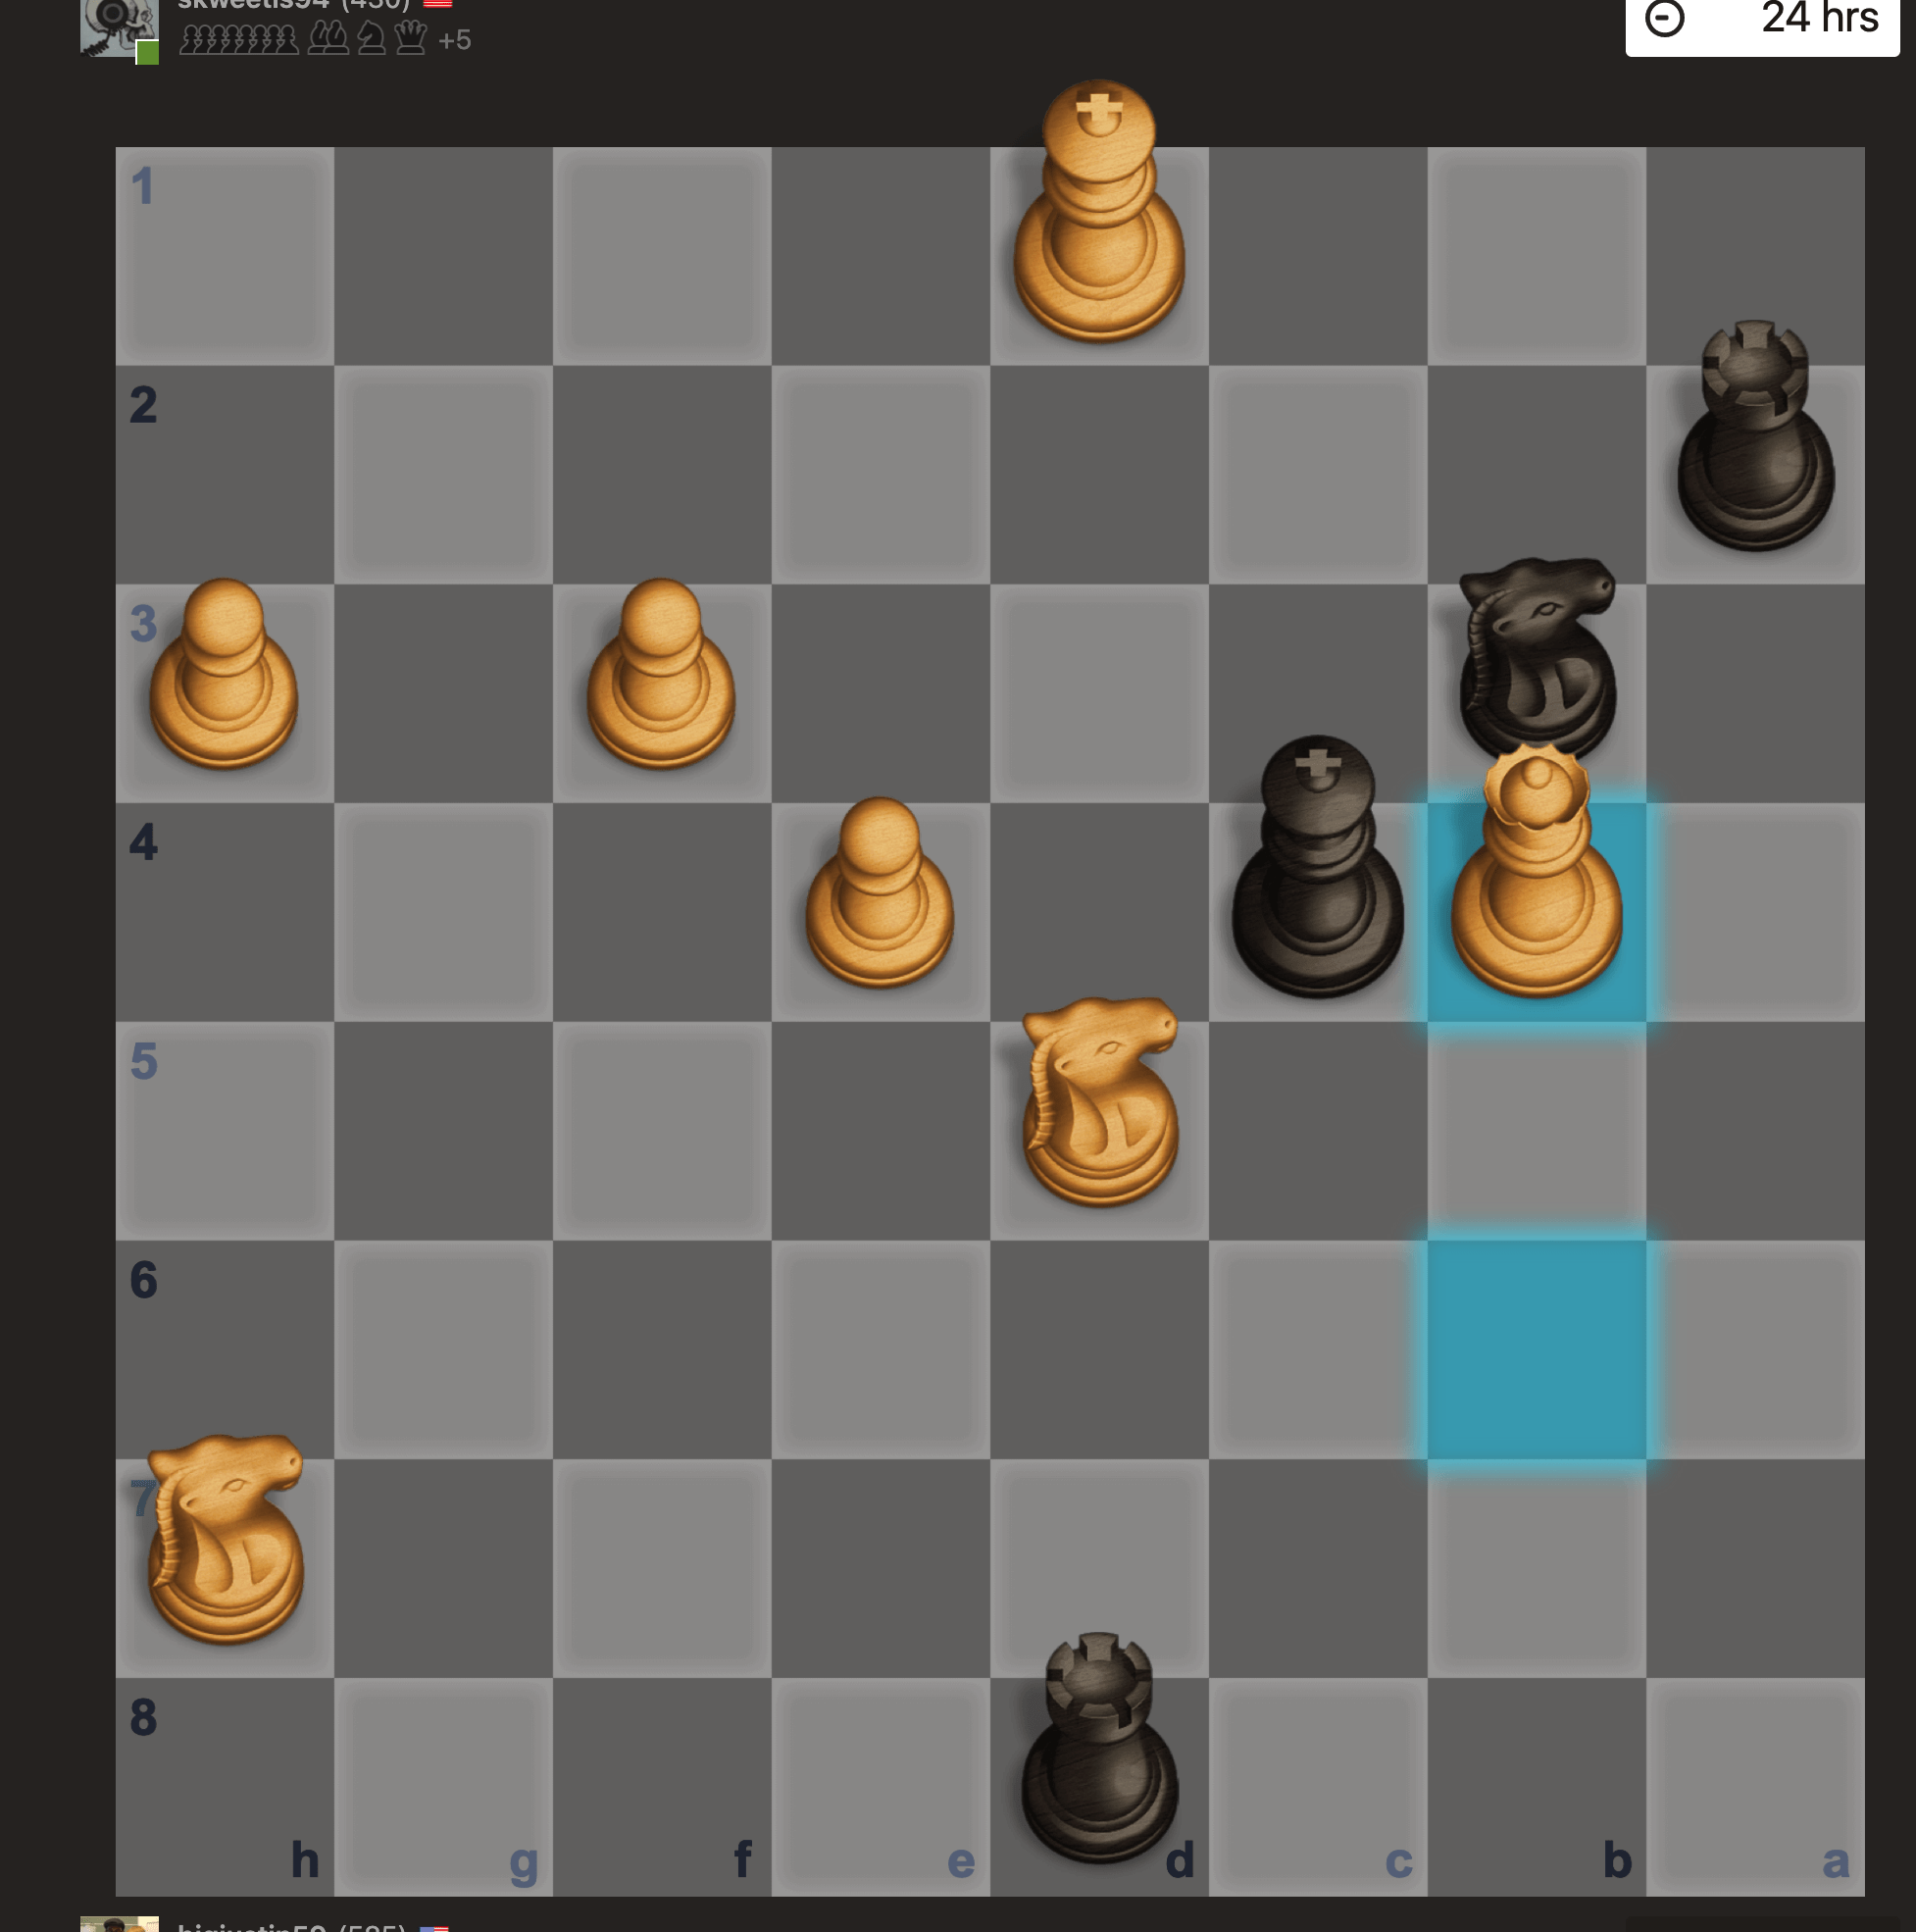 File:Checkmate of black king after anticipation of white queen